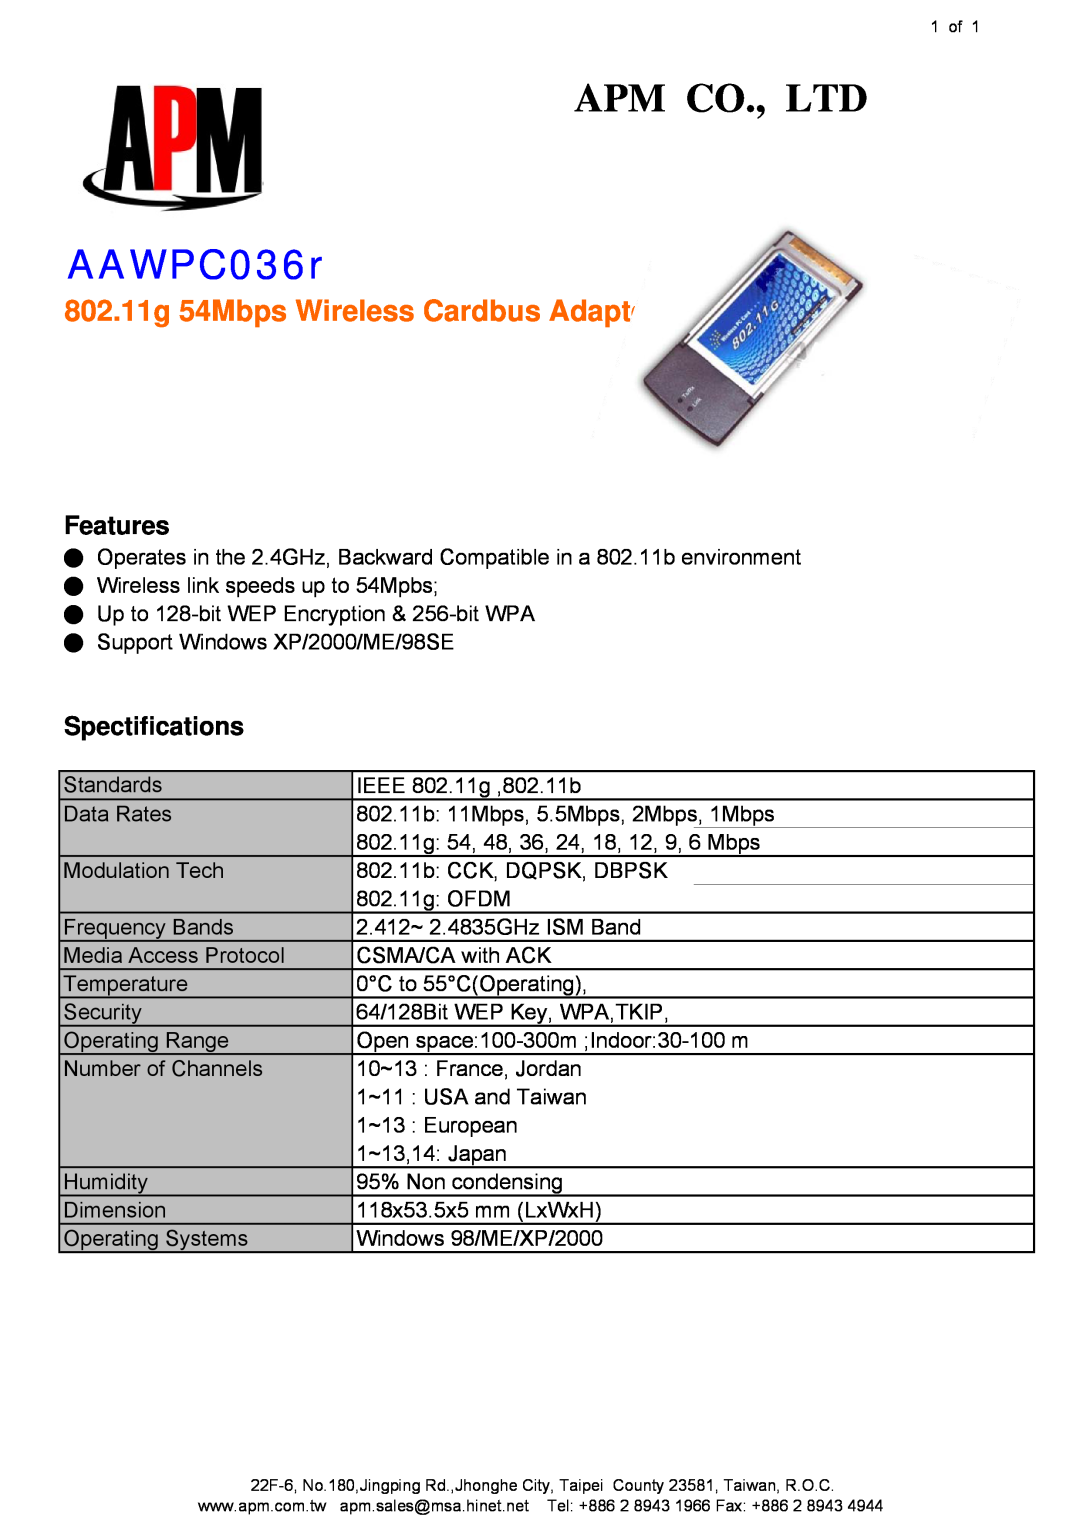 APM AAWPC036r manual 802.11g 54Mbps Wireless Cardbus Adapter, Features, Spectifications 